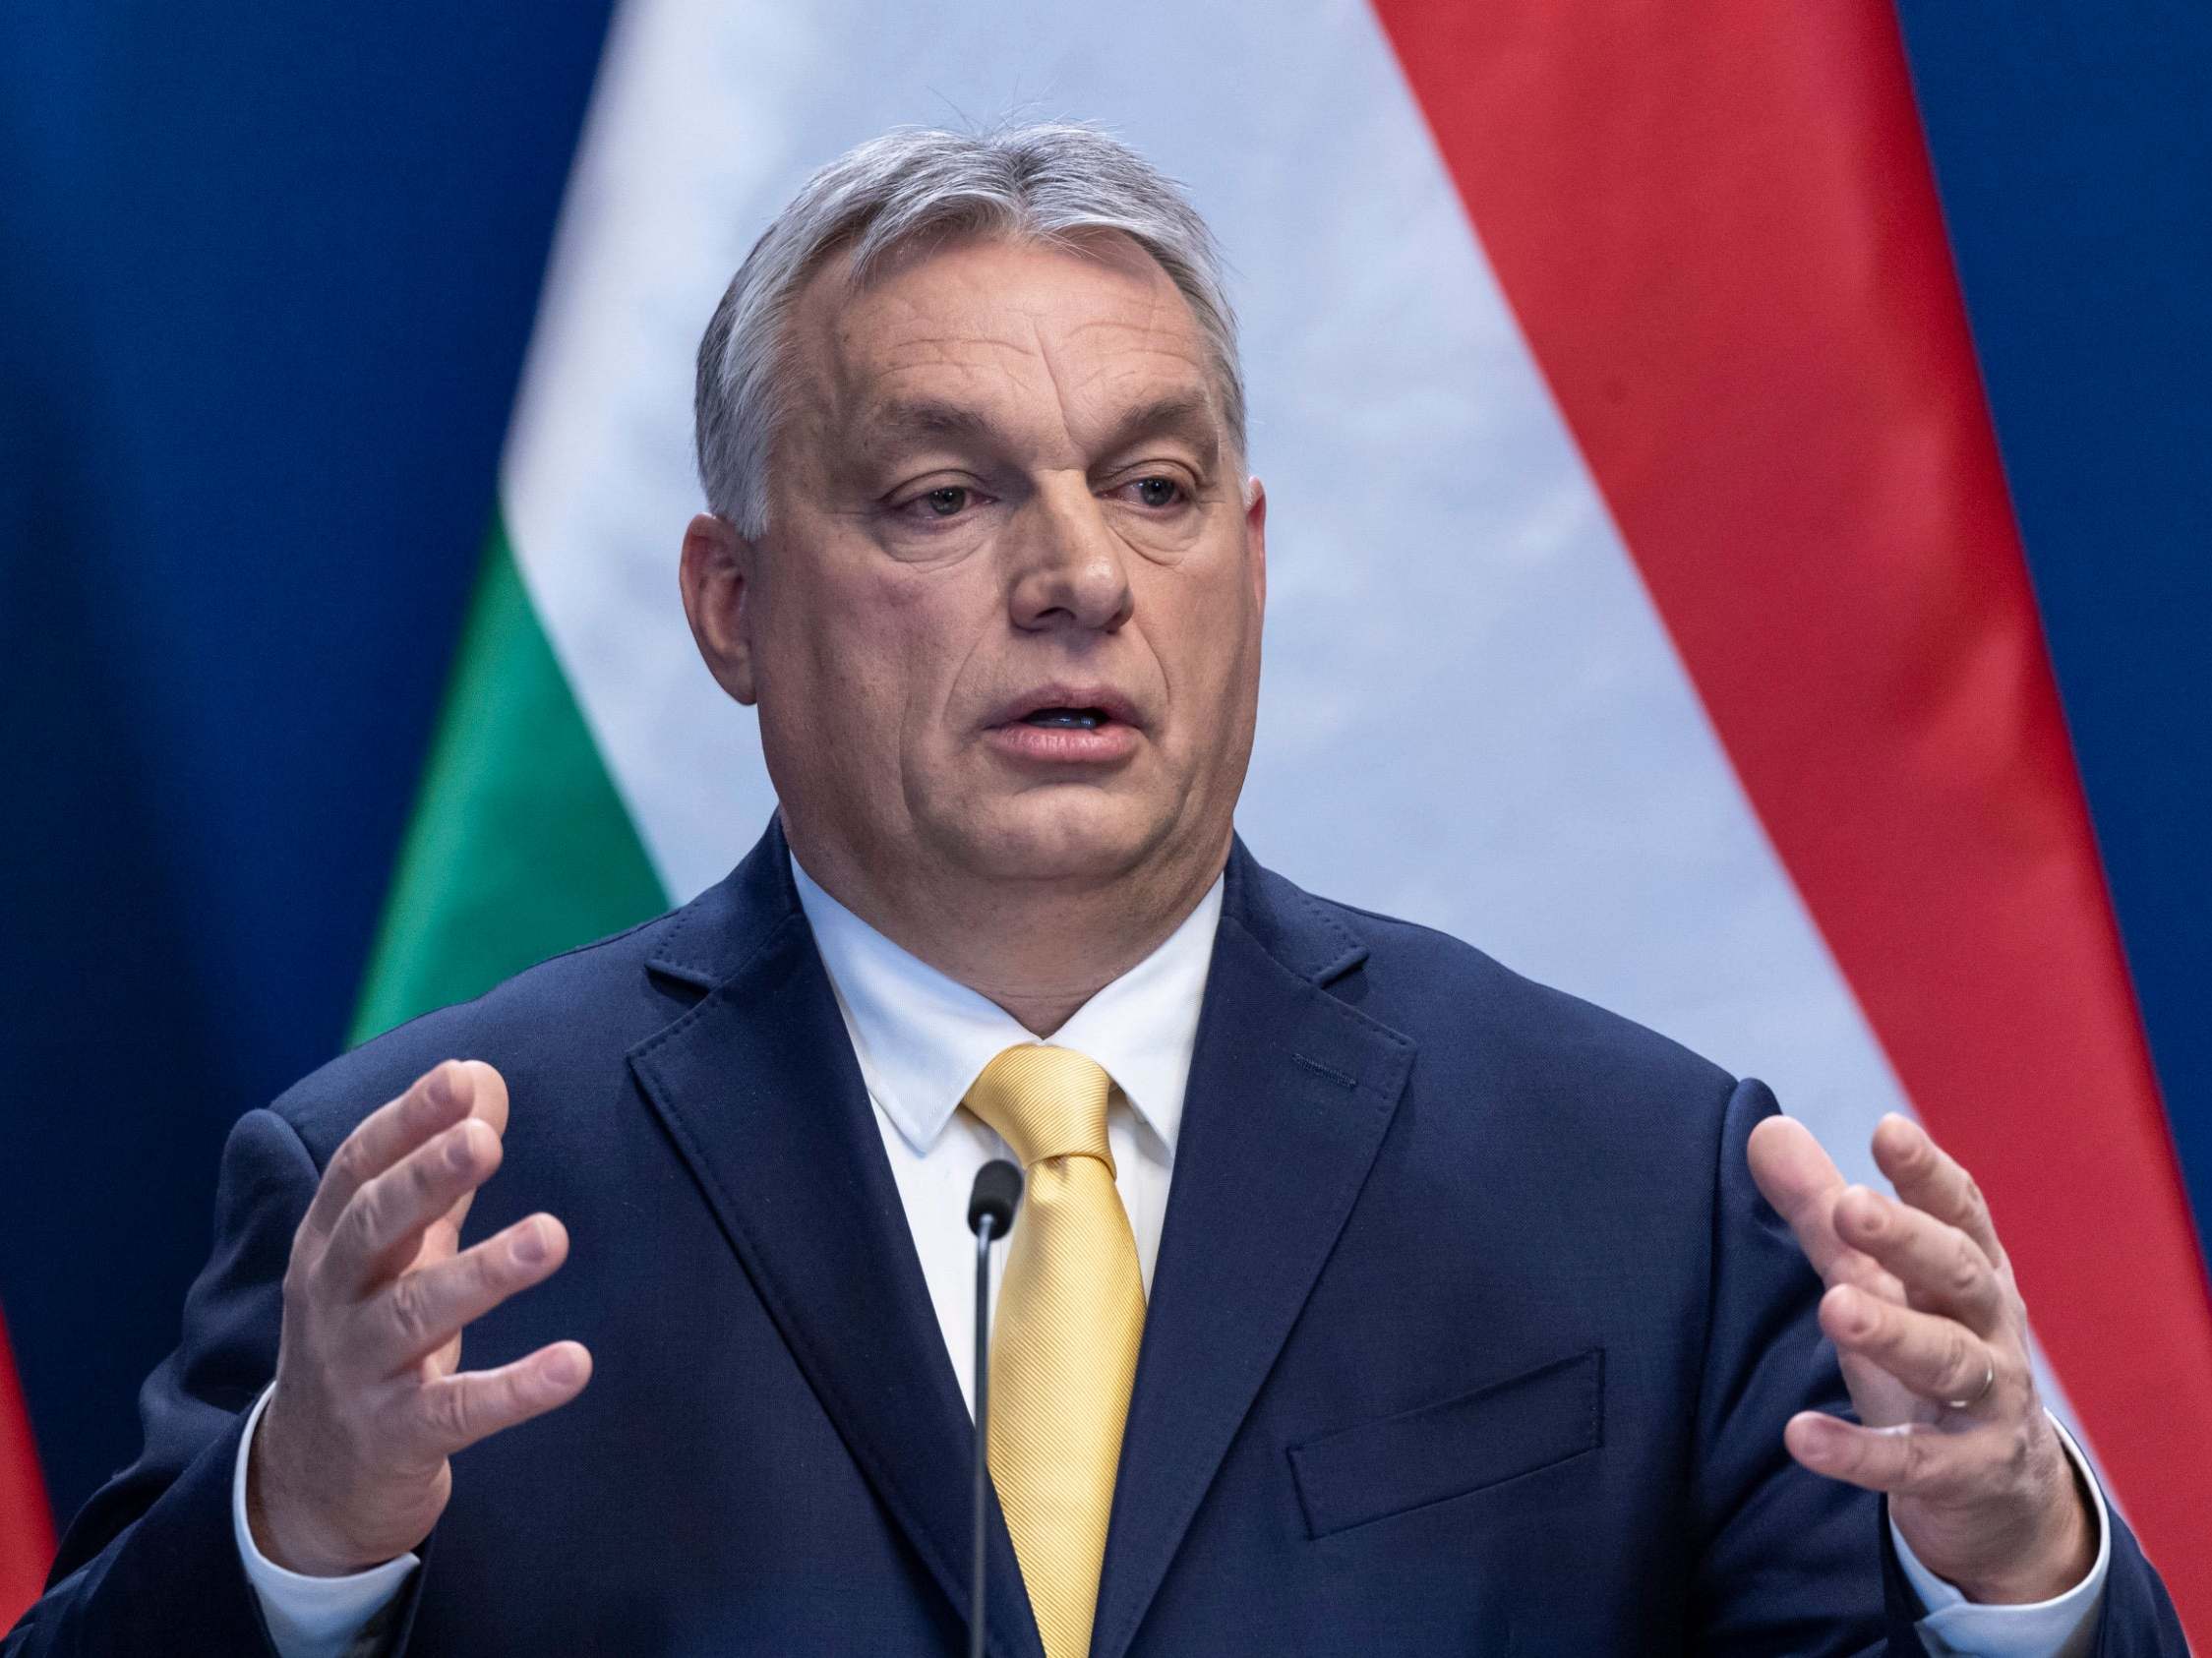 Hungarian Prime Minister Viktor Orban adresses the media during the annual international press conference in Budapest